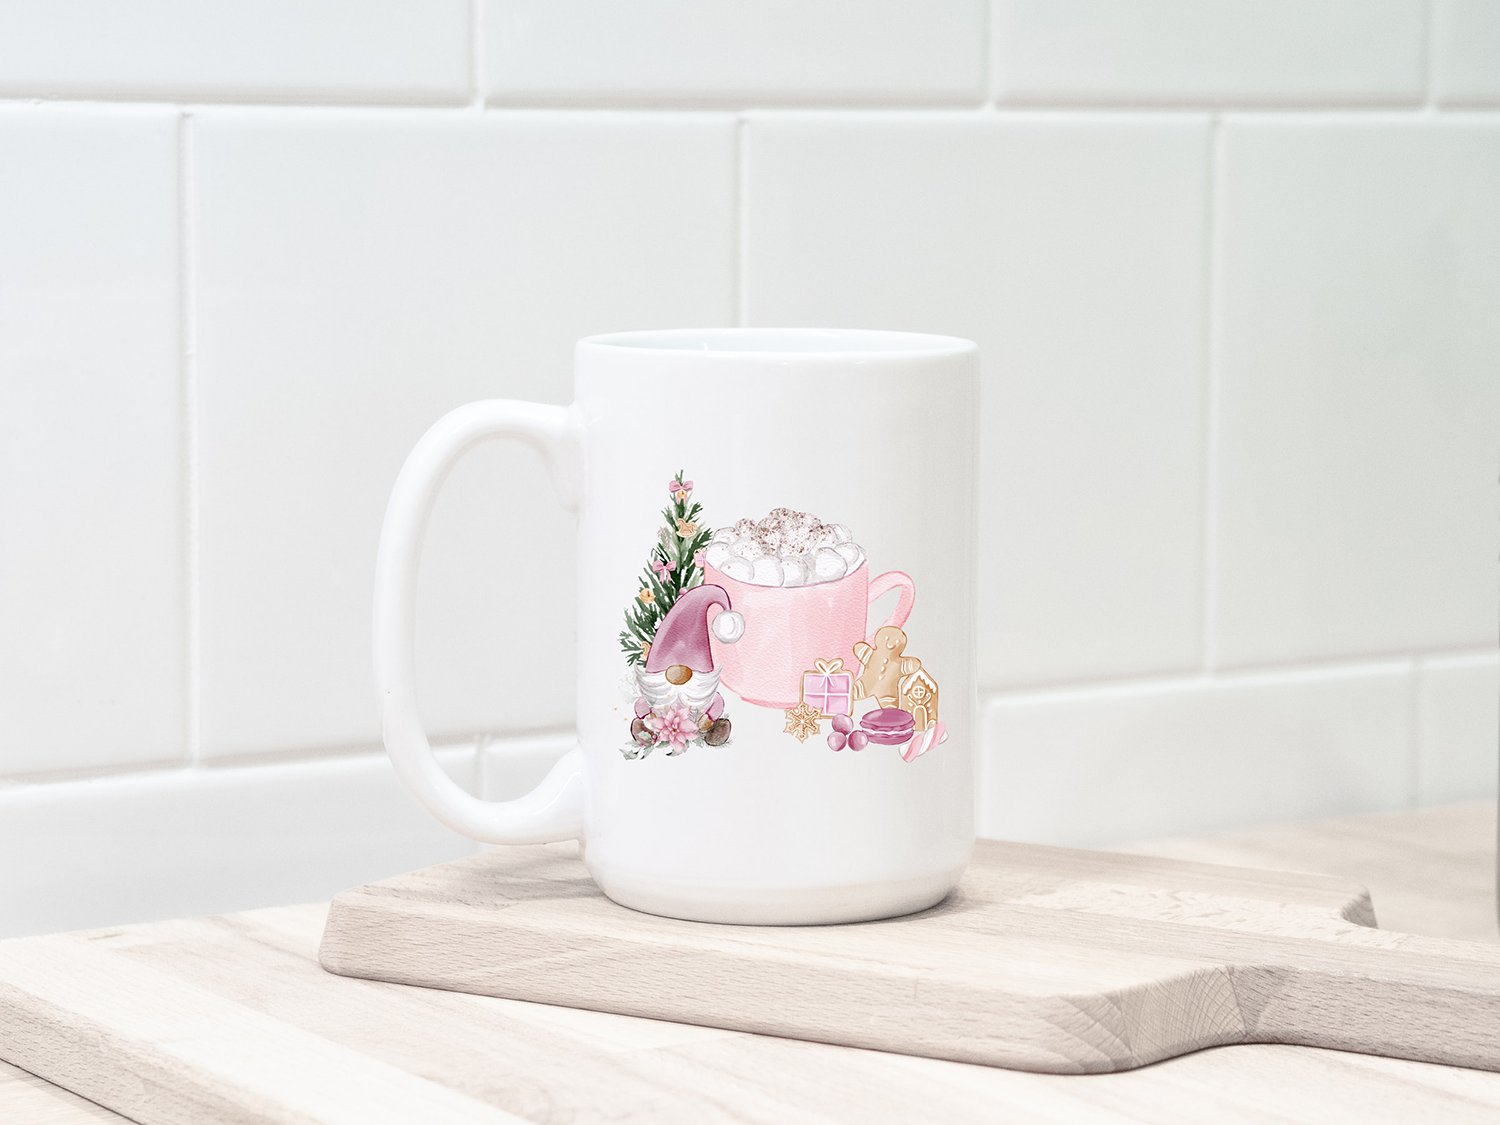 Big white tea cup with Christmas pink graphic.